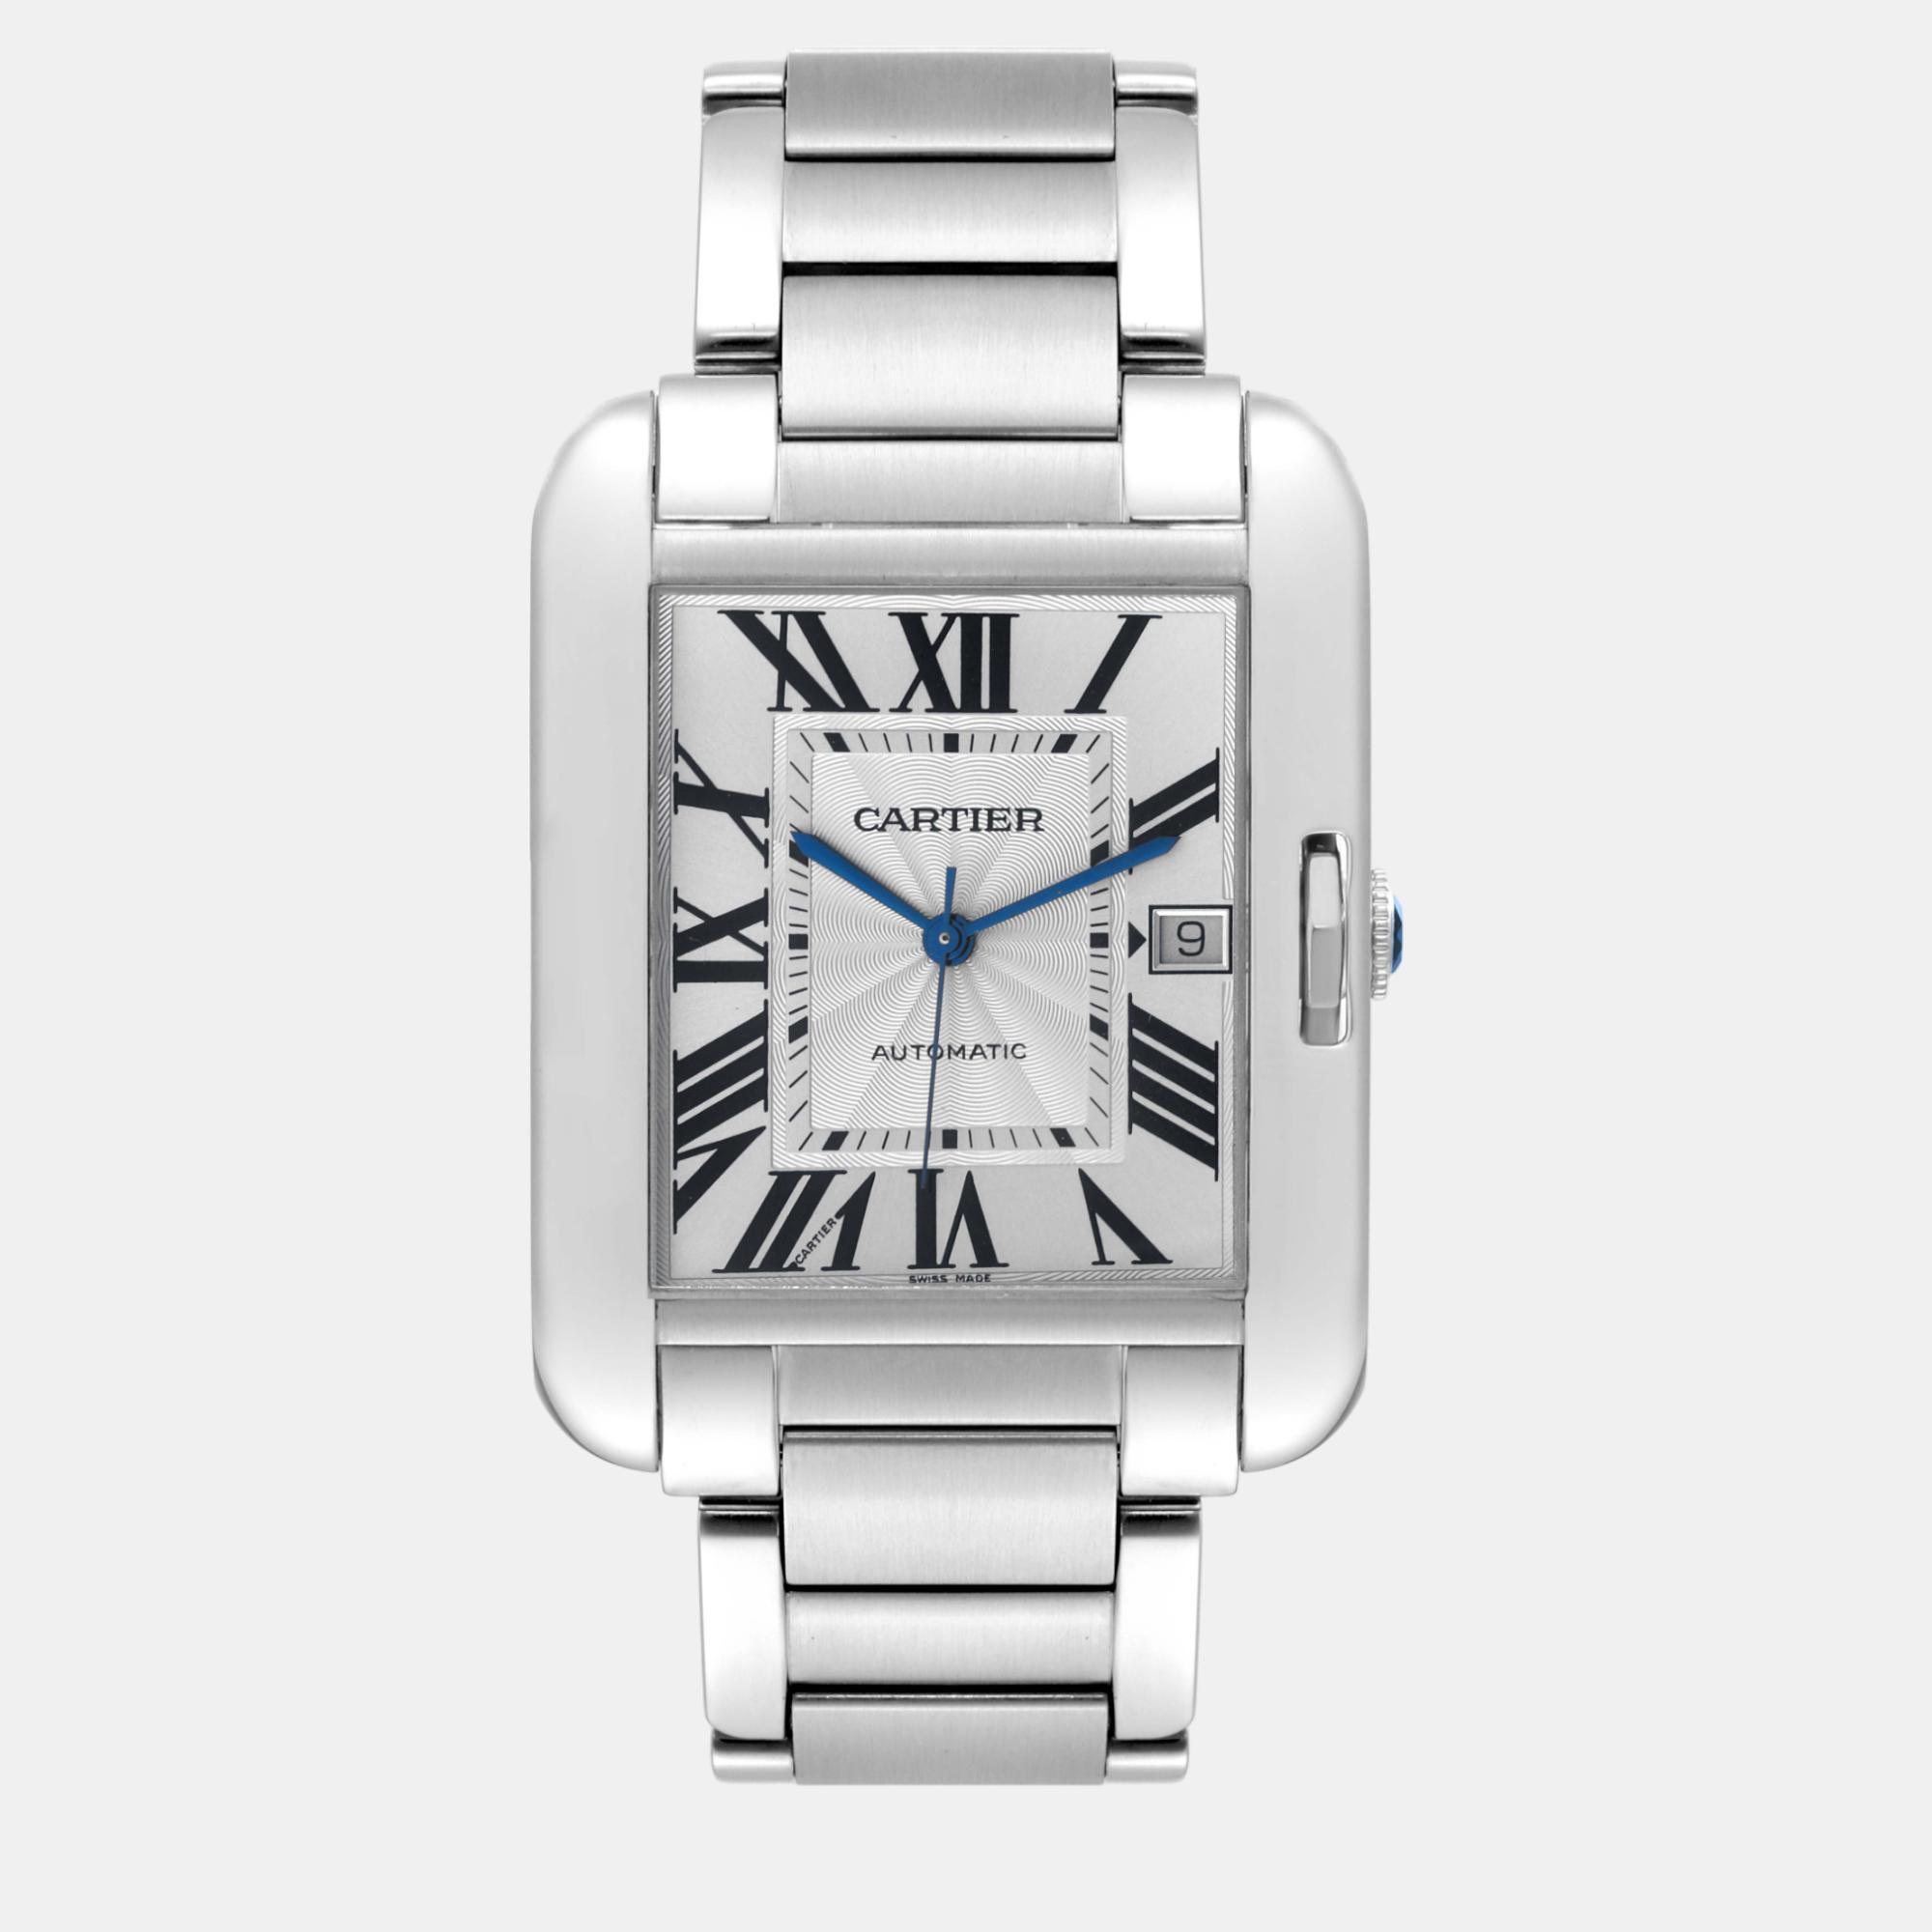 Cartier tank anglaise xl steel automatic men's watch 36.2 mm